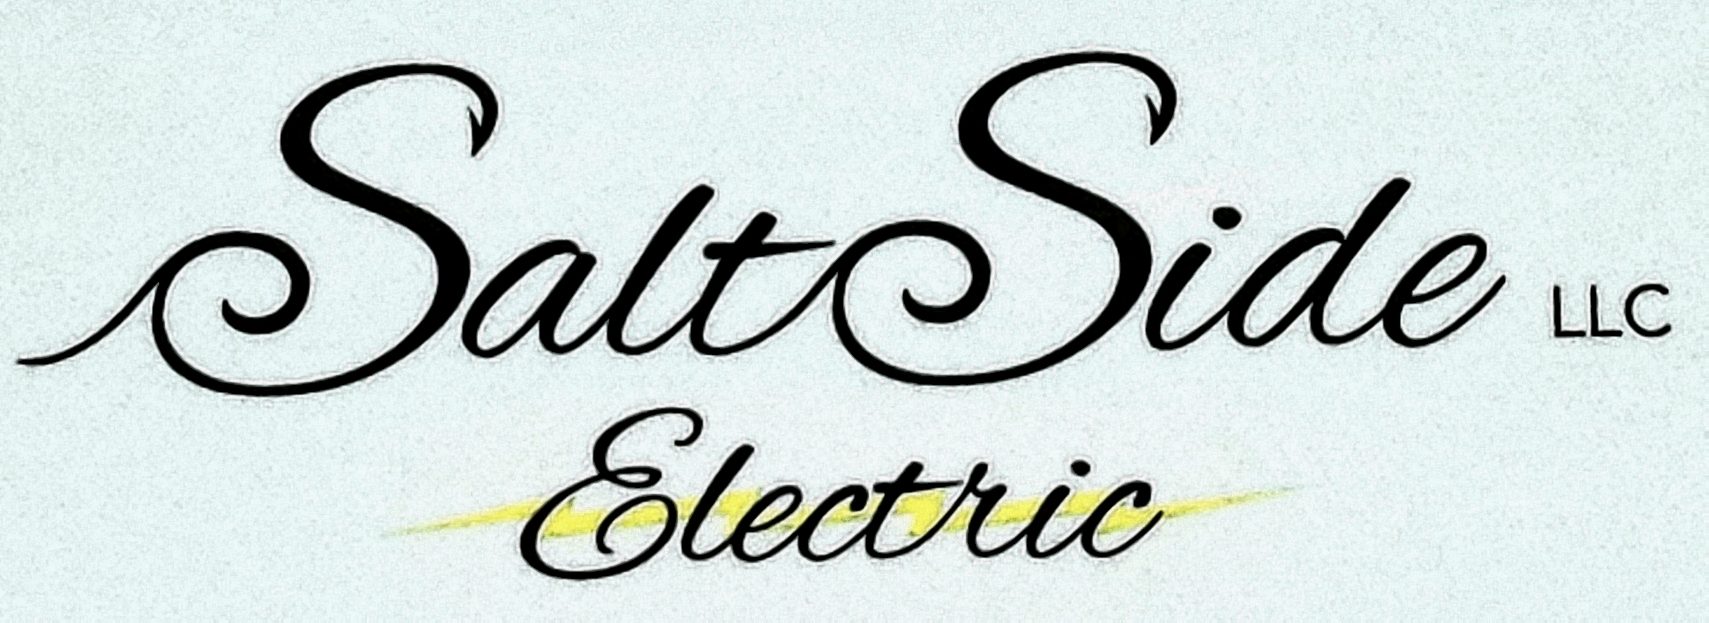 Welcome to SaltSide Electric